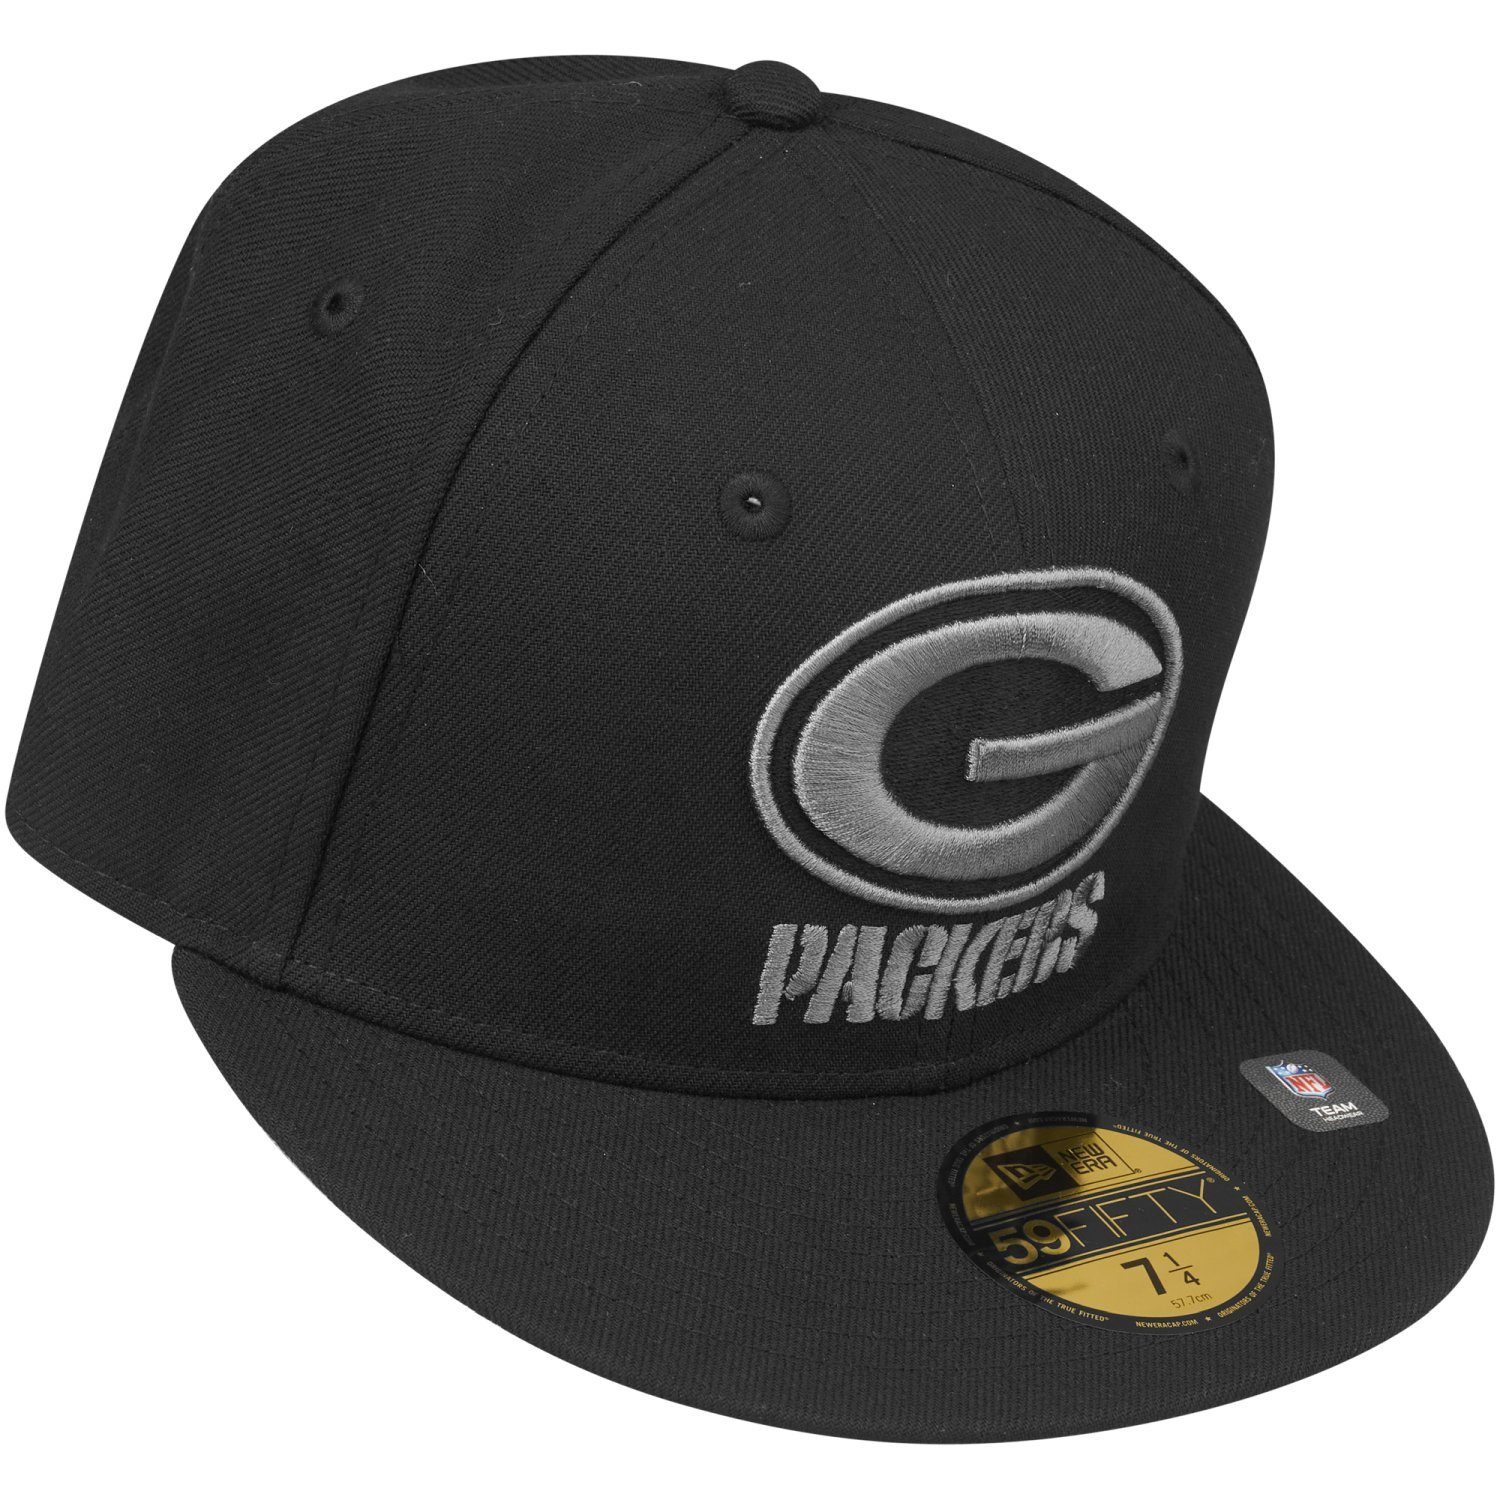 New Era Fitted Green TEAMS Packers 59Fifty Cap NFL Bay